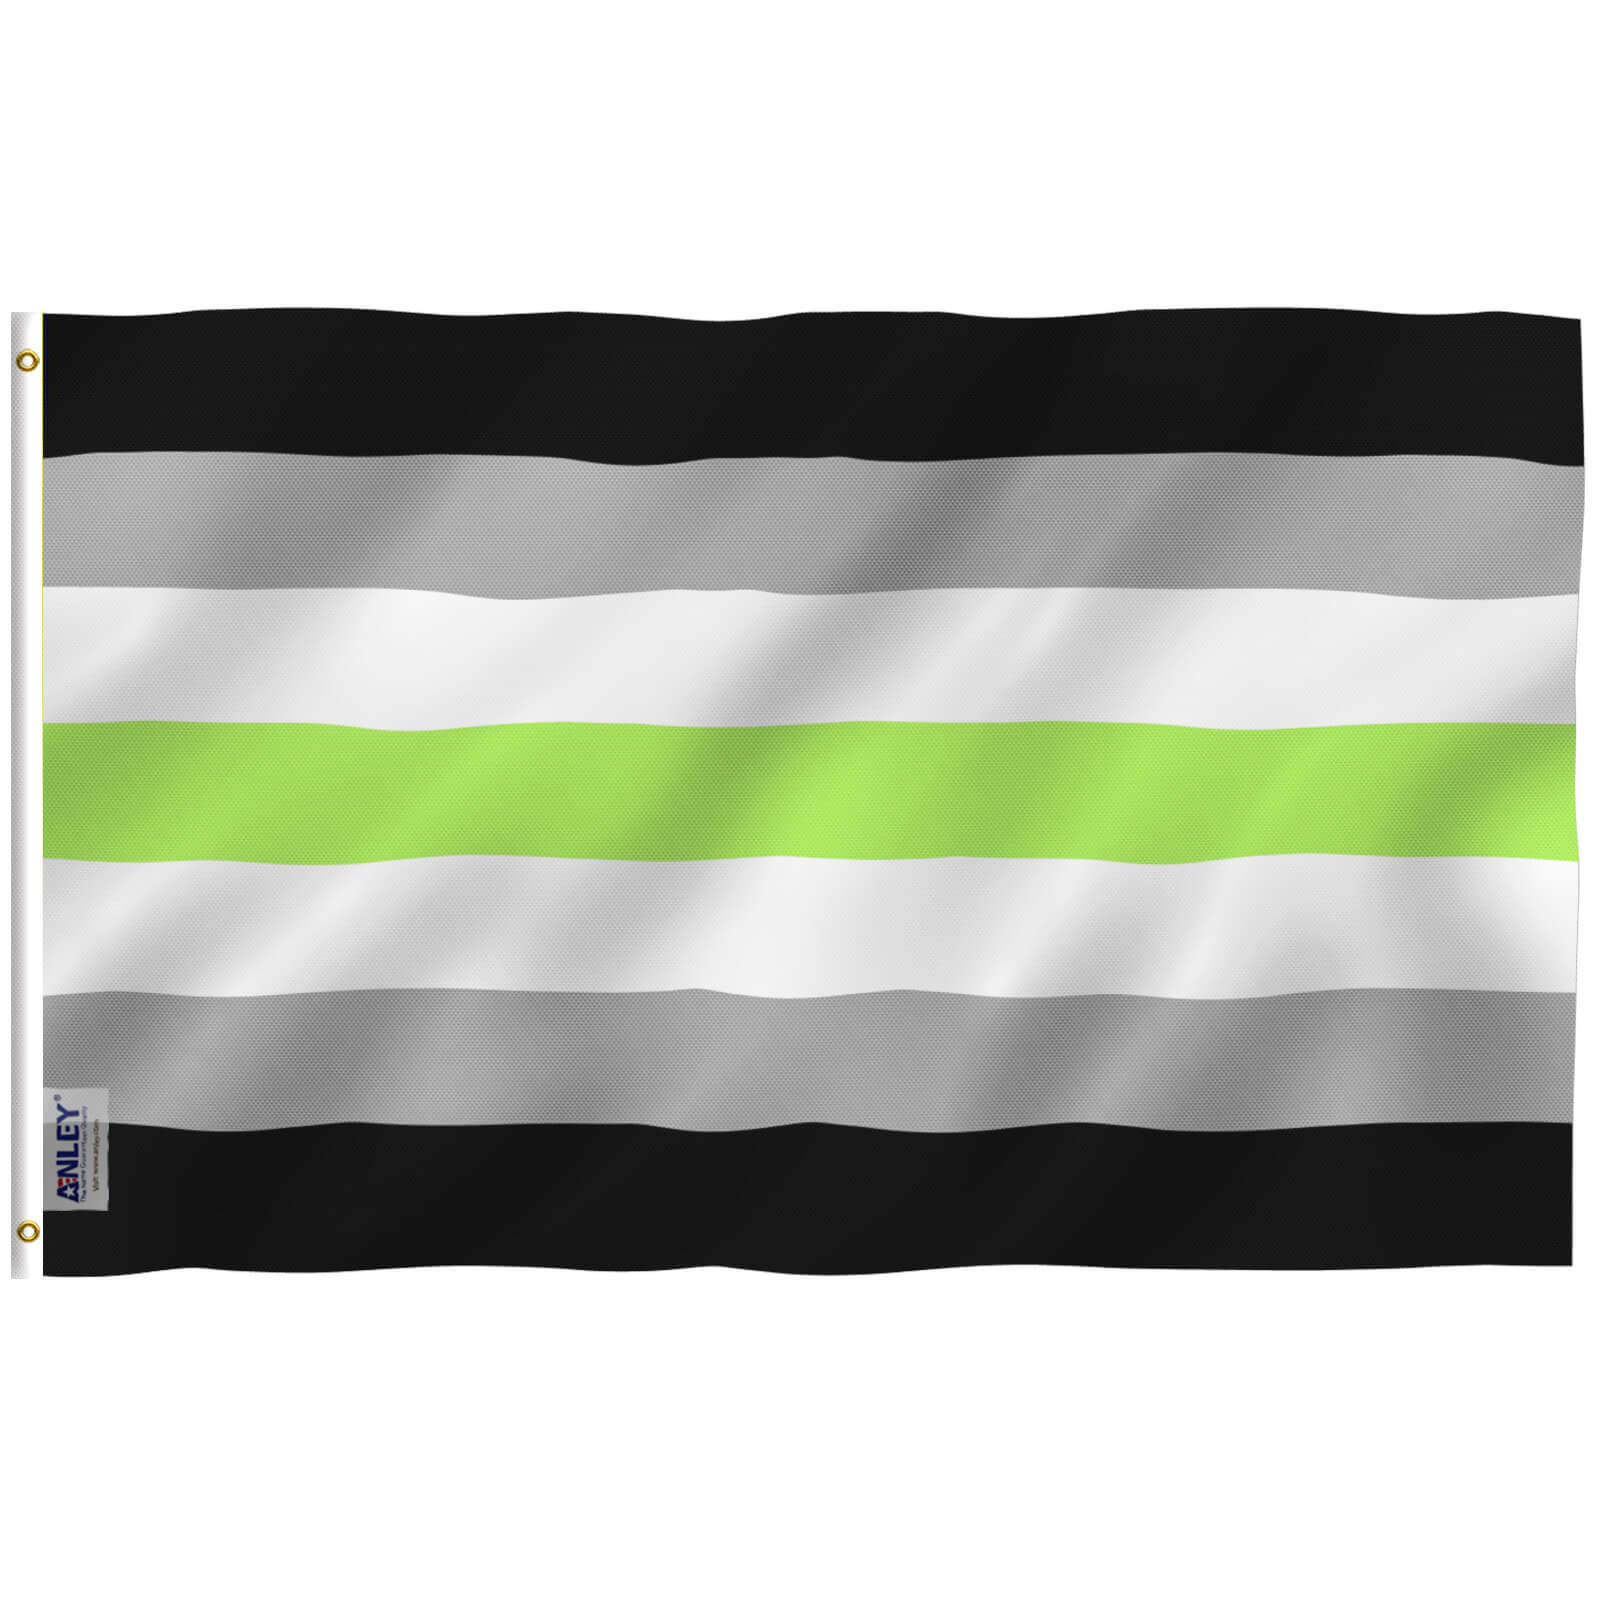 Fly Breeze Agender Pride Flag 3x5 Foot Anley Flags